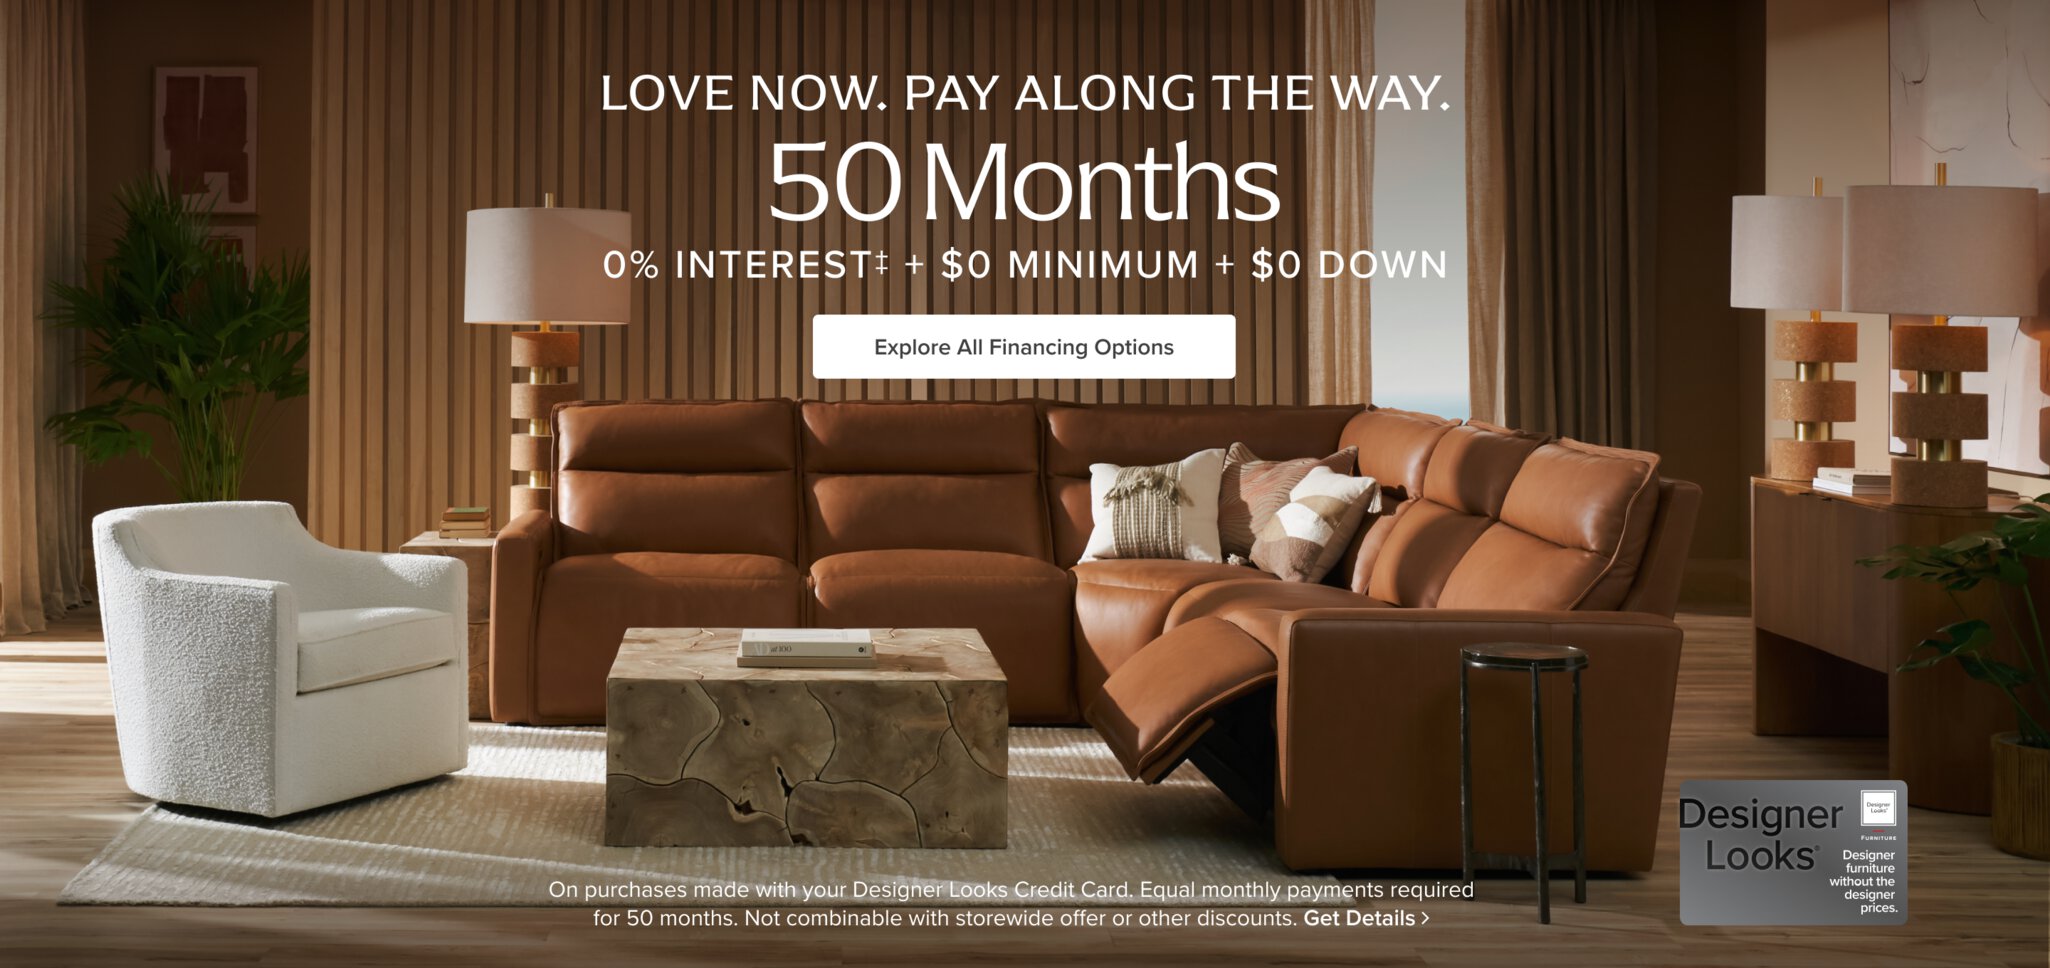 Love now. Pay 
along the way. 50 Months 0% Interest + $0 Minimum + $0 Down Explore all financing options > On purchases made with your designer looks credit card. Equal monthly payments required for 50 months. Not combinable with storewide offer or other discounts. Get Details > 